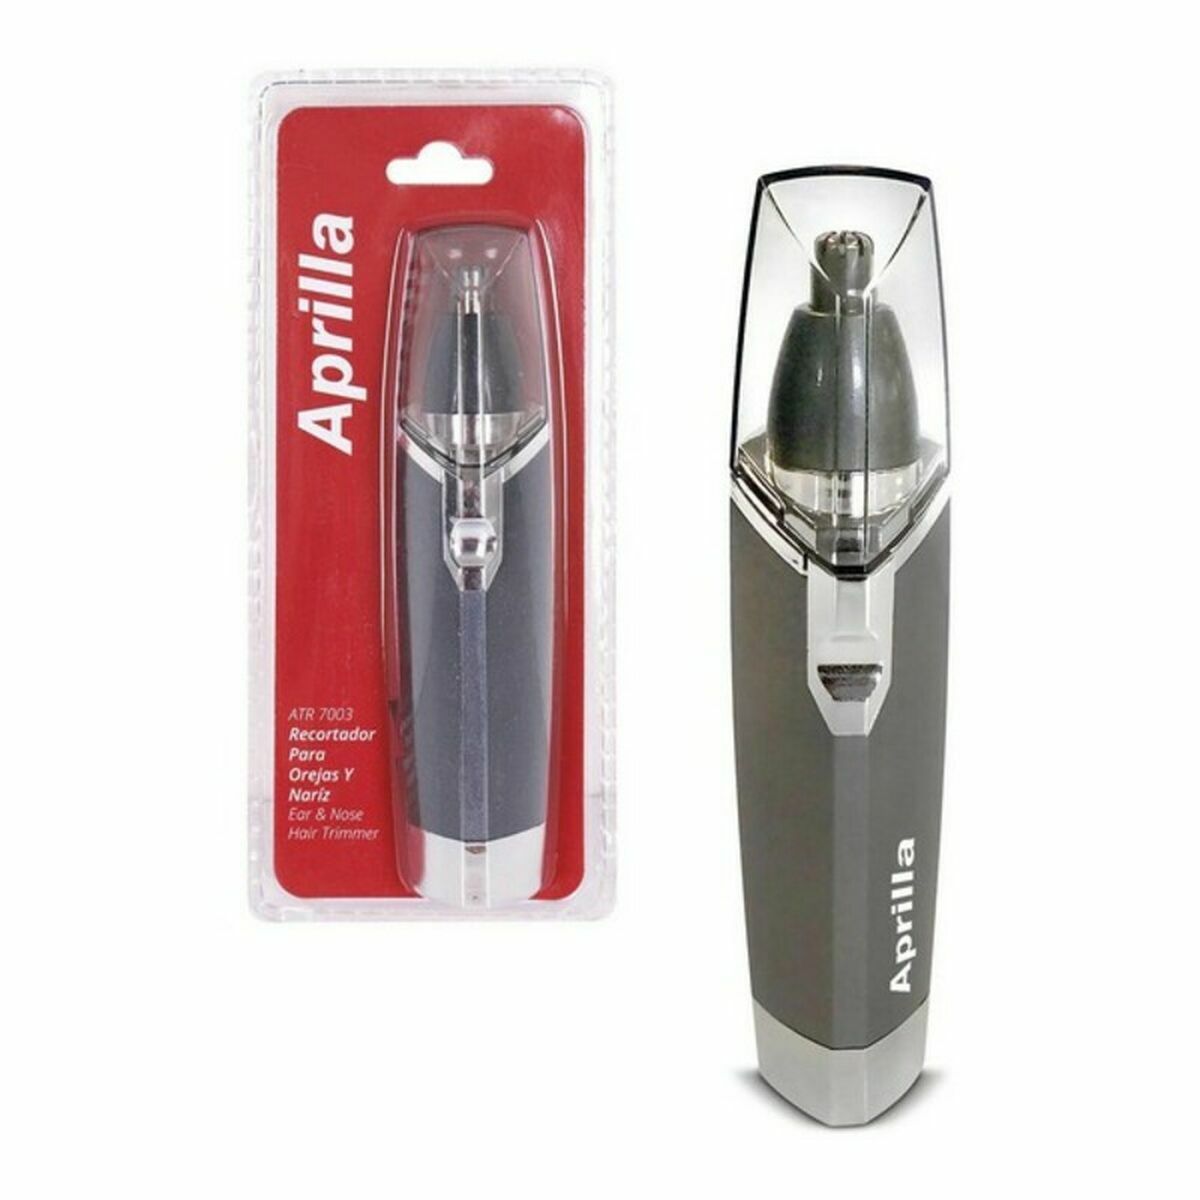 Hair Trimmer for Nose and Ears Aprilla ATR7003 Black